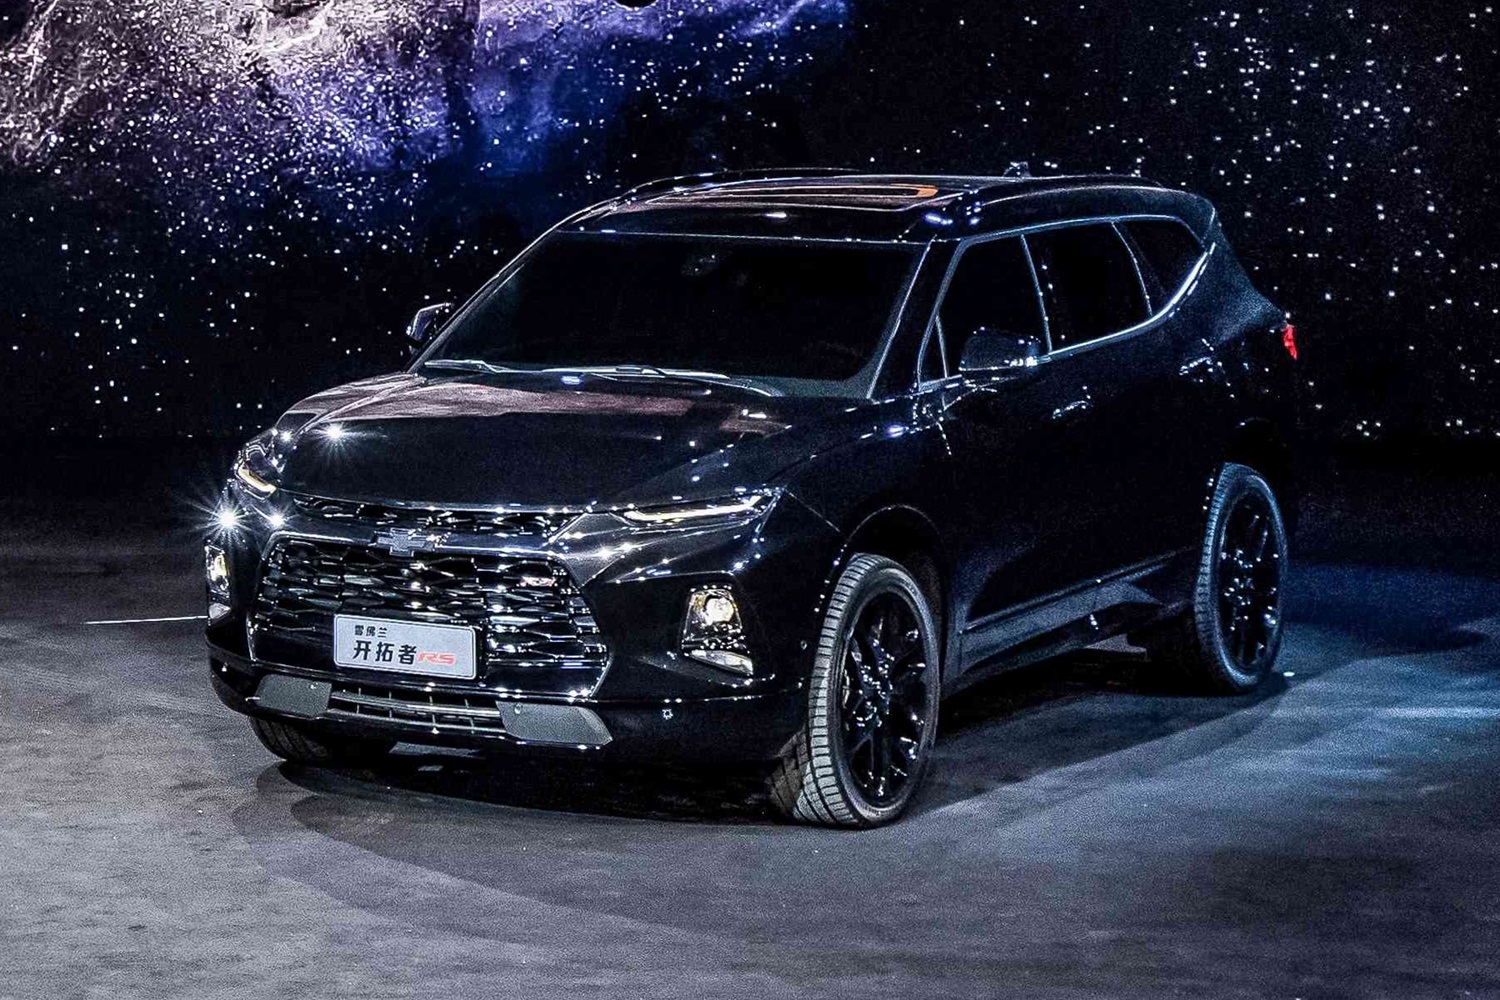 New 7-seater Chevrolet BLAZER 2020 launches in China